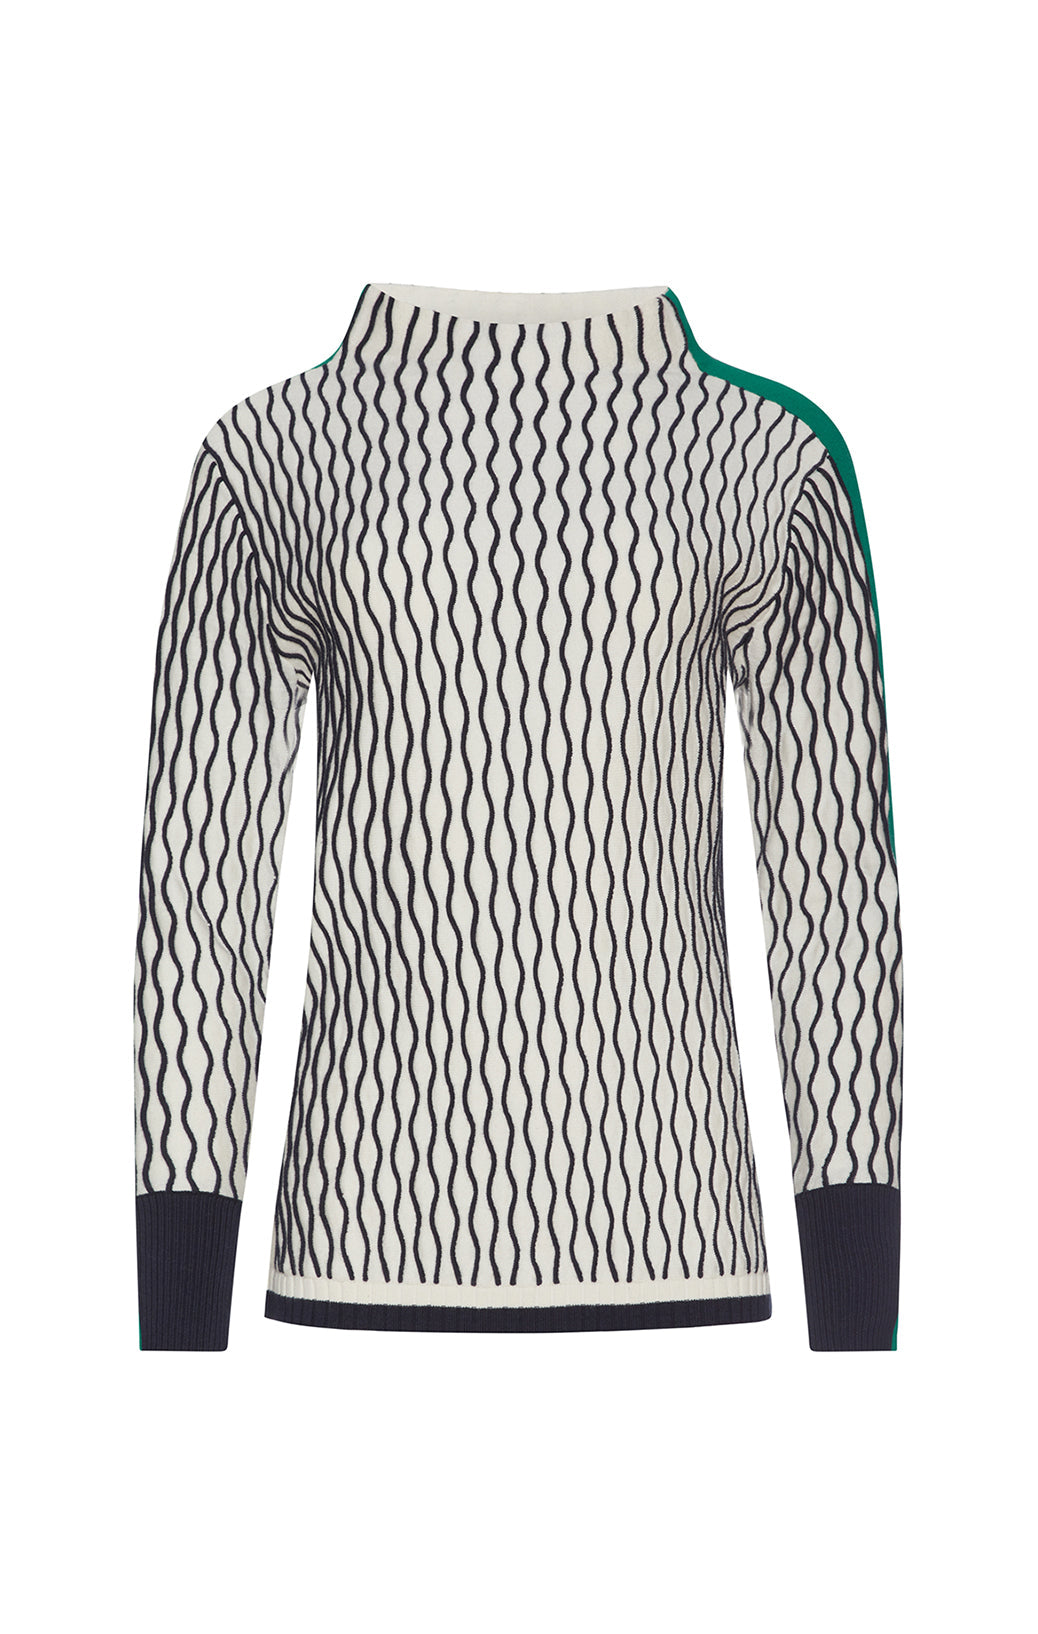 Napoleon - Striped Knit Zip Top - Product Image